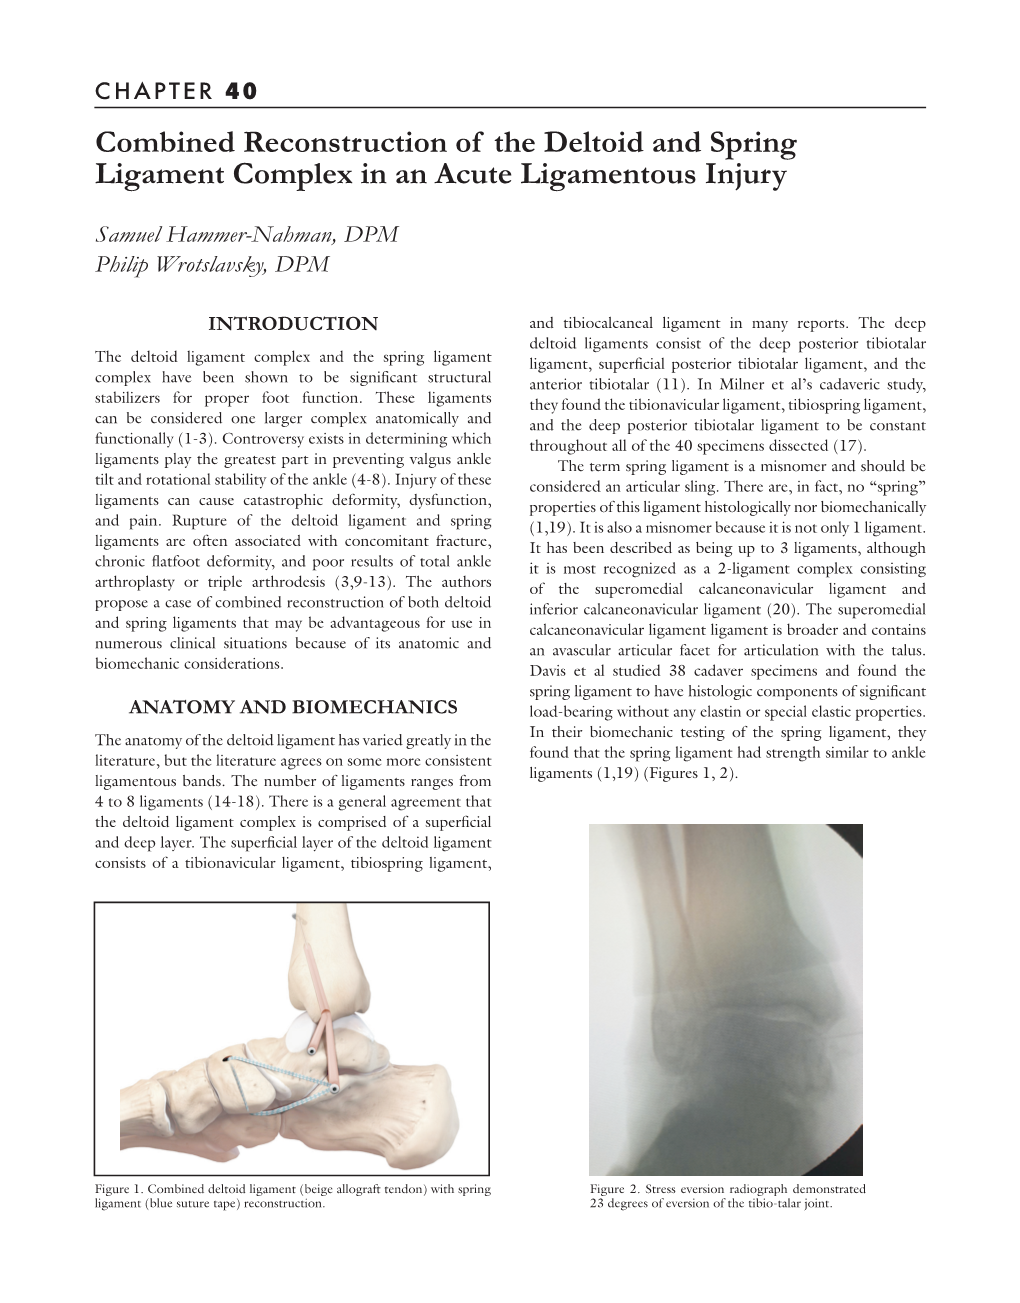 Combined Reconstruction of the Deltoid and Spring Ligament Complex in an Acute Ligamentous Injury